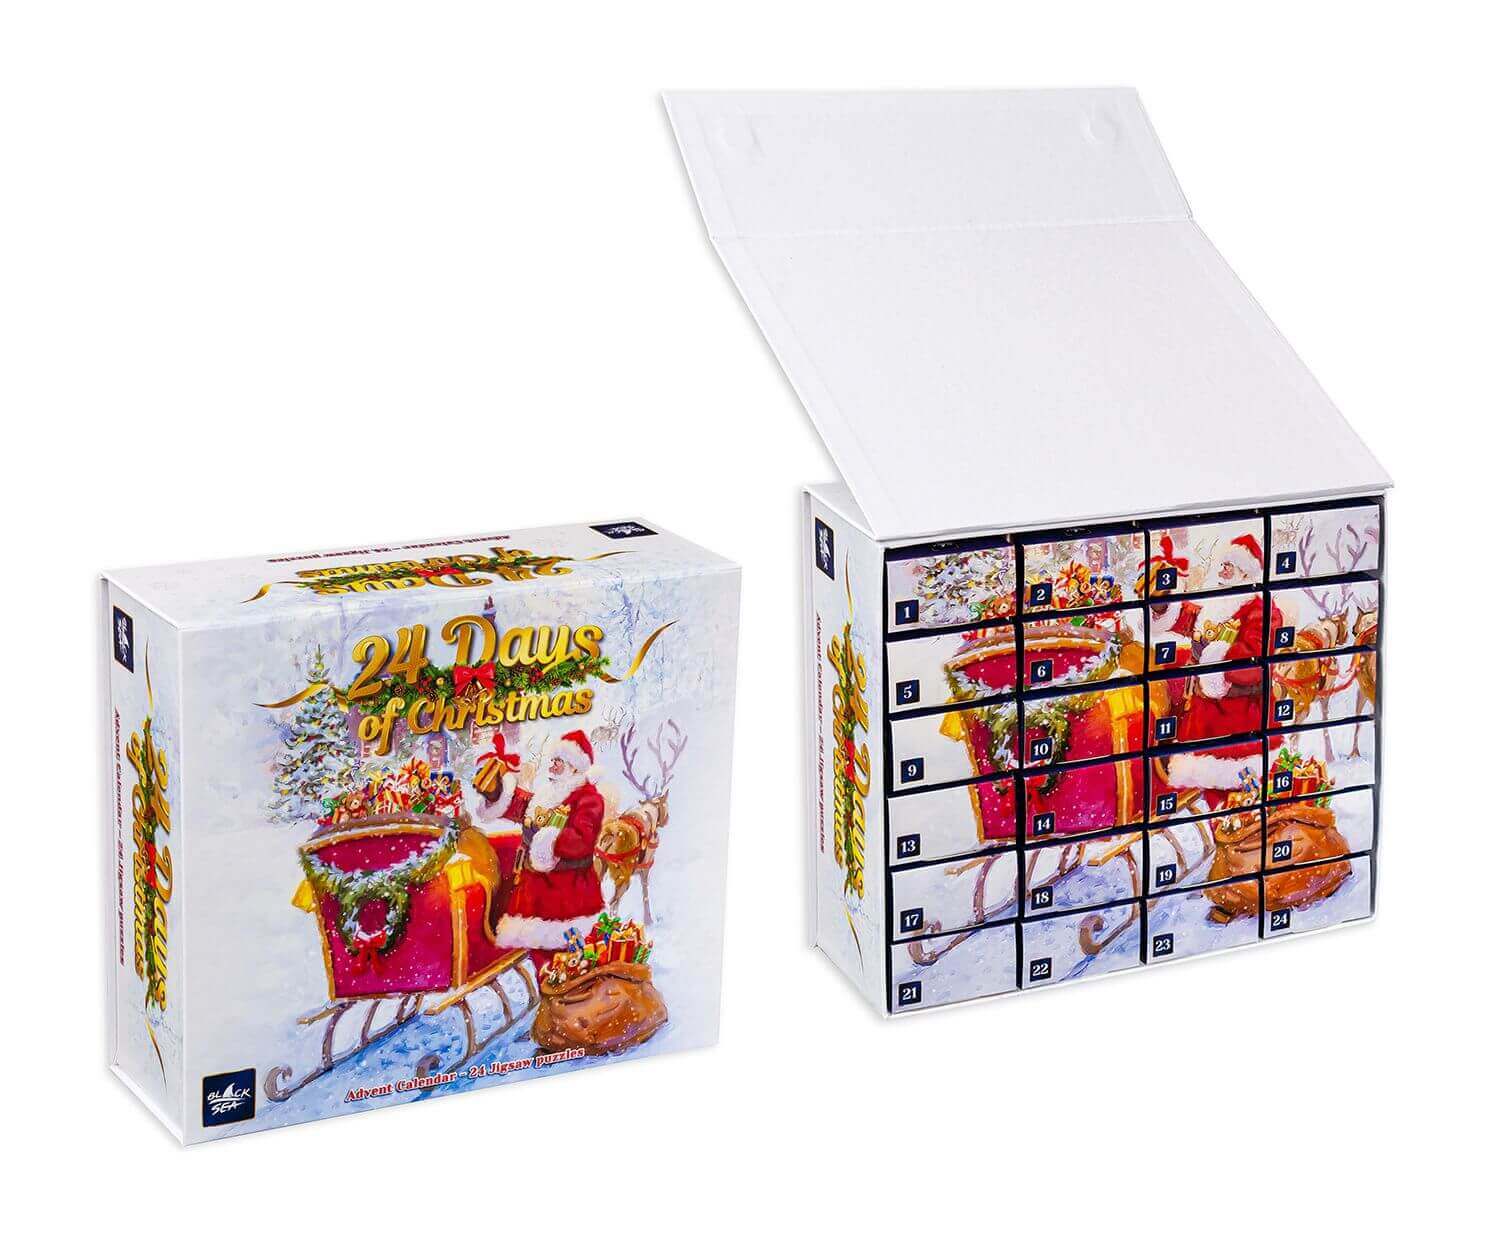 Christmas Advent Calendar 24x54 pieces - 24 Days of Christmas, Unveil a piece of Christmas magic every day with the latest addition to the Black Sea collection - an advent calendar featuring 24 thematic mini puzzles, packaged in a luxurious box. In the sp